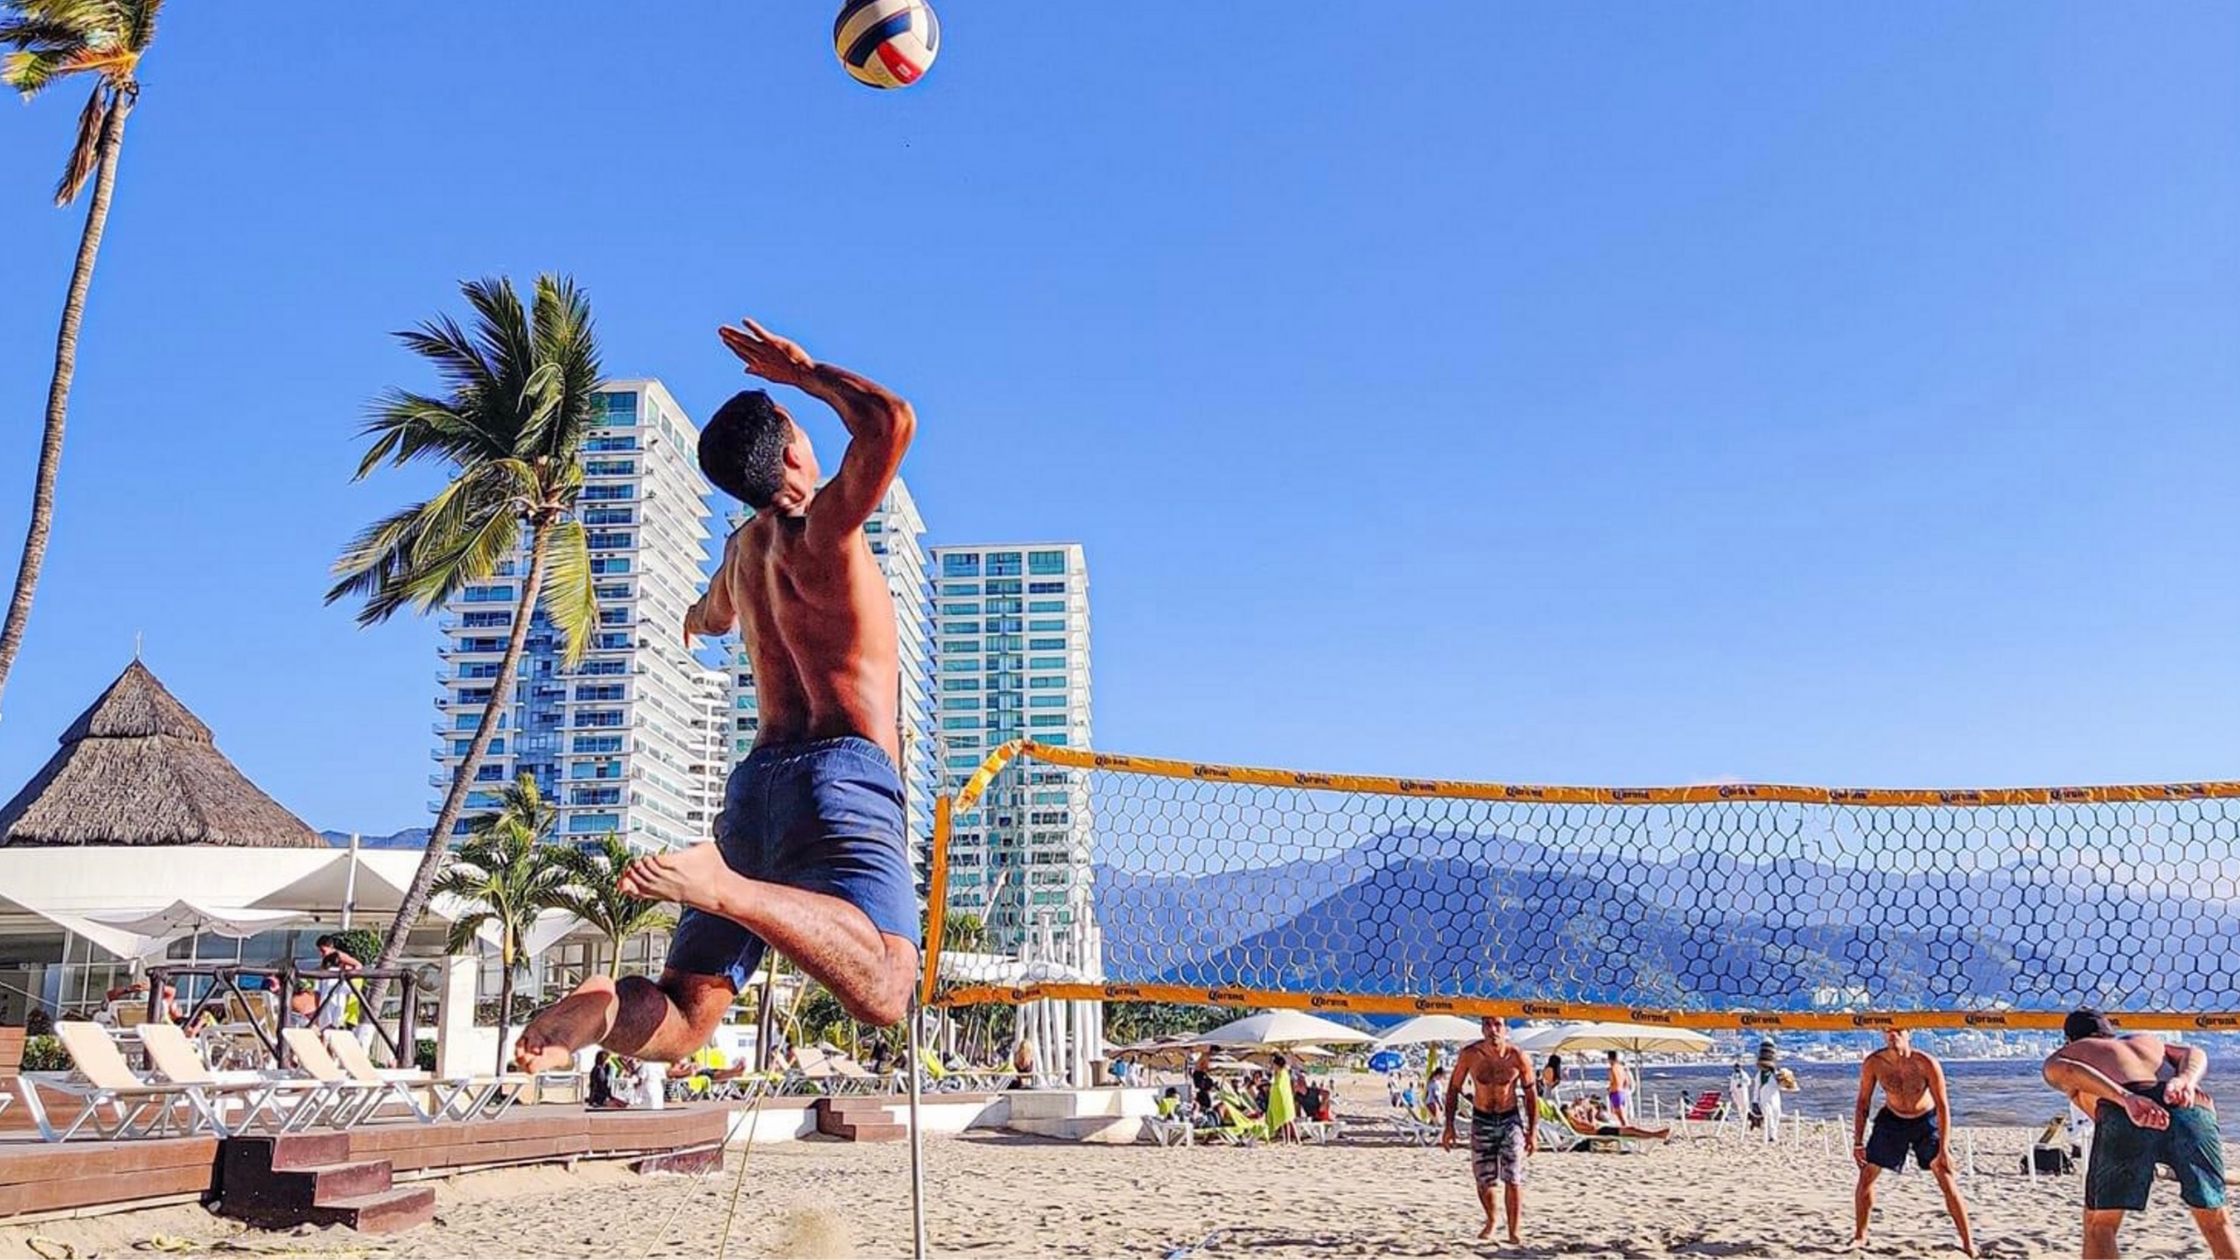 a guy playing hand ball at the beach